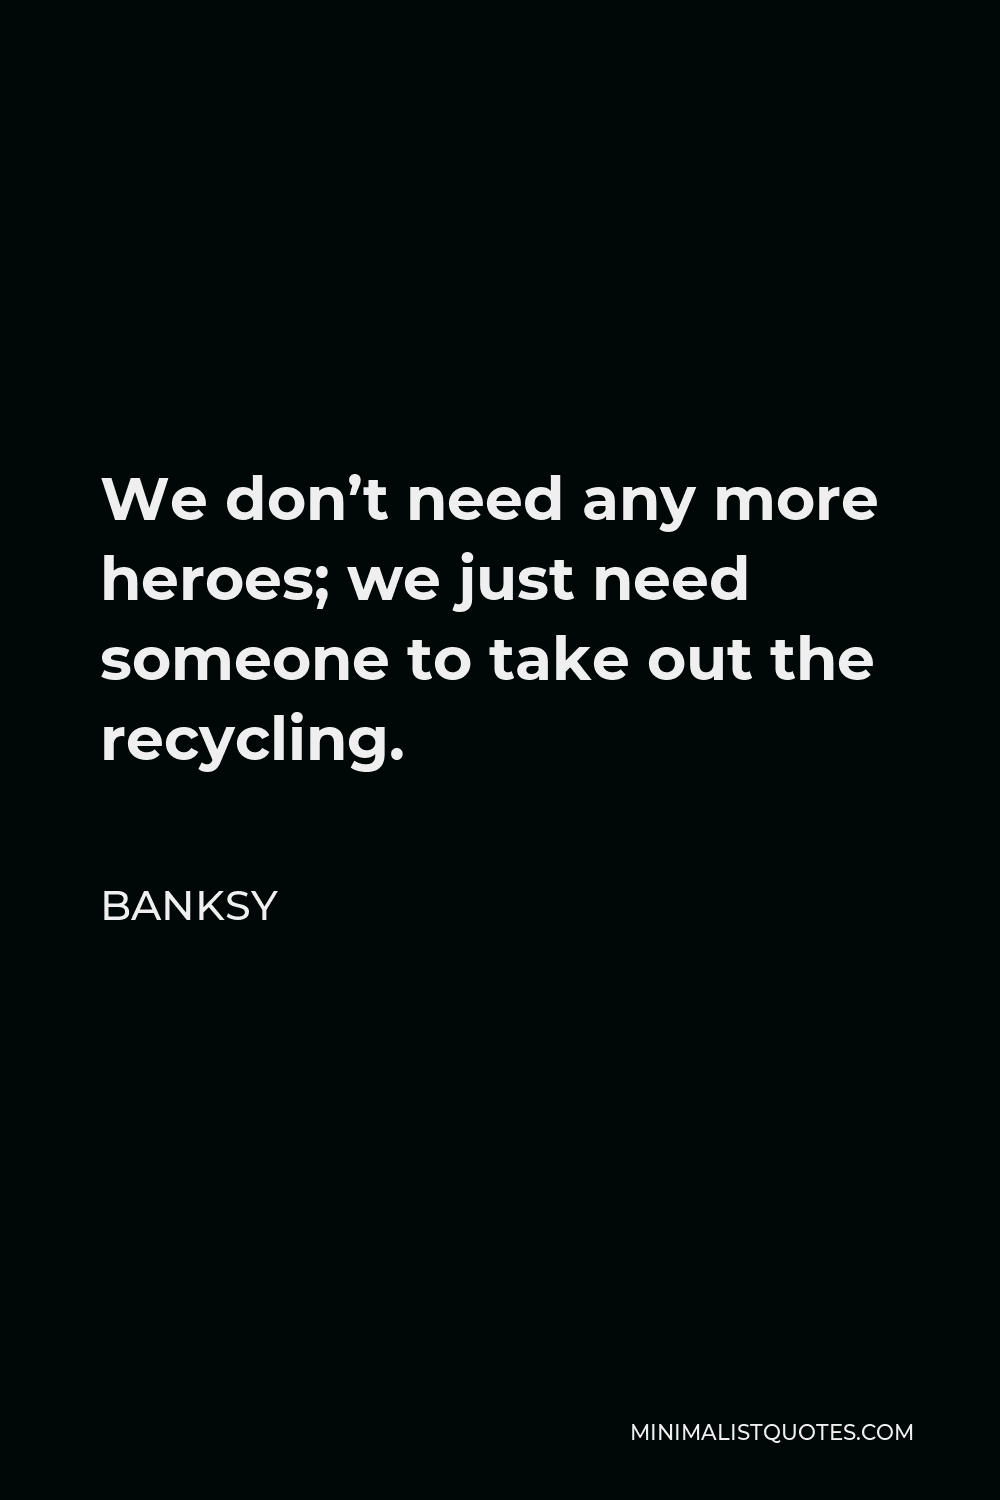 Banksy Quote - We don’t need any more heroes; we just need someone to take out the recycling.